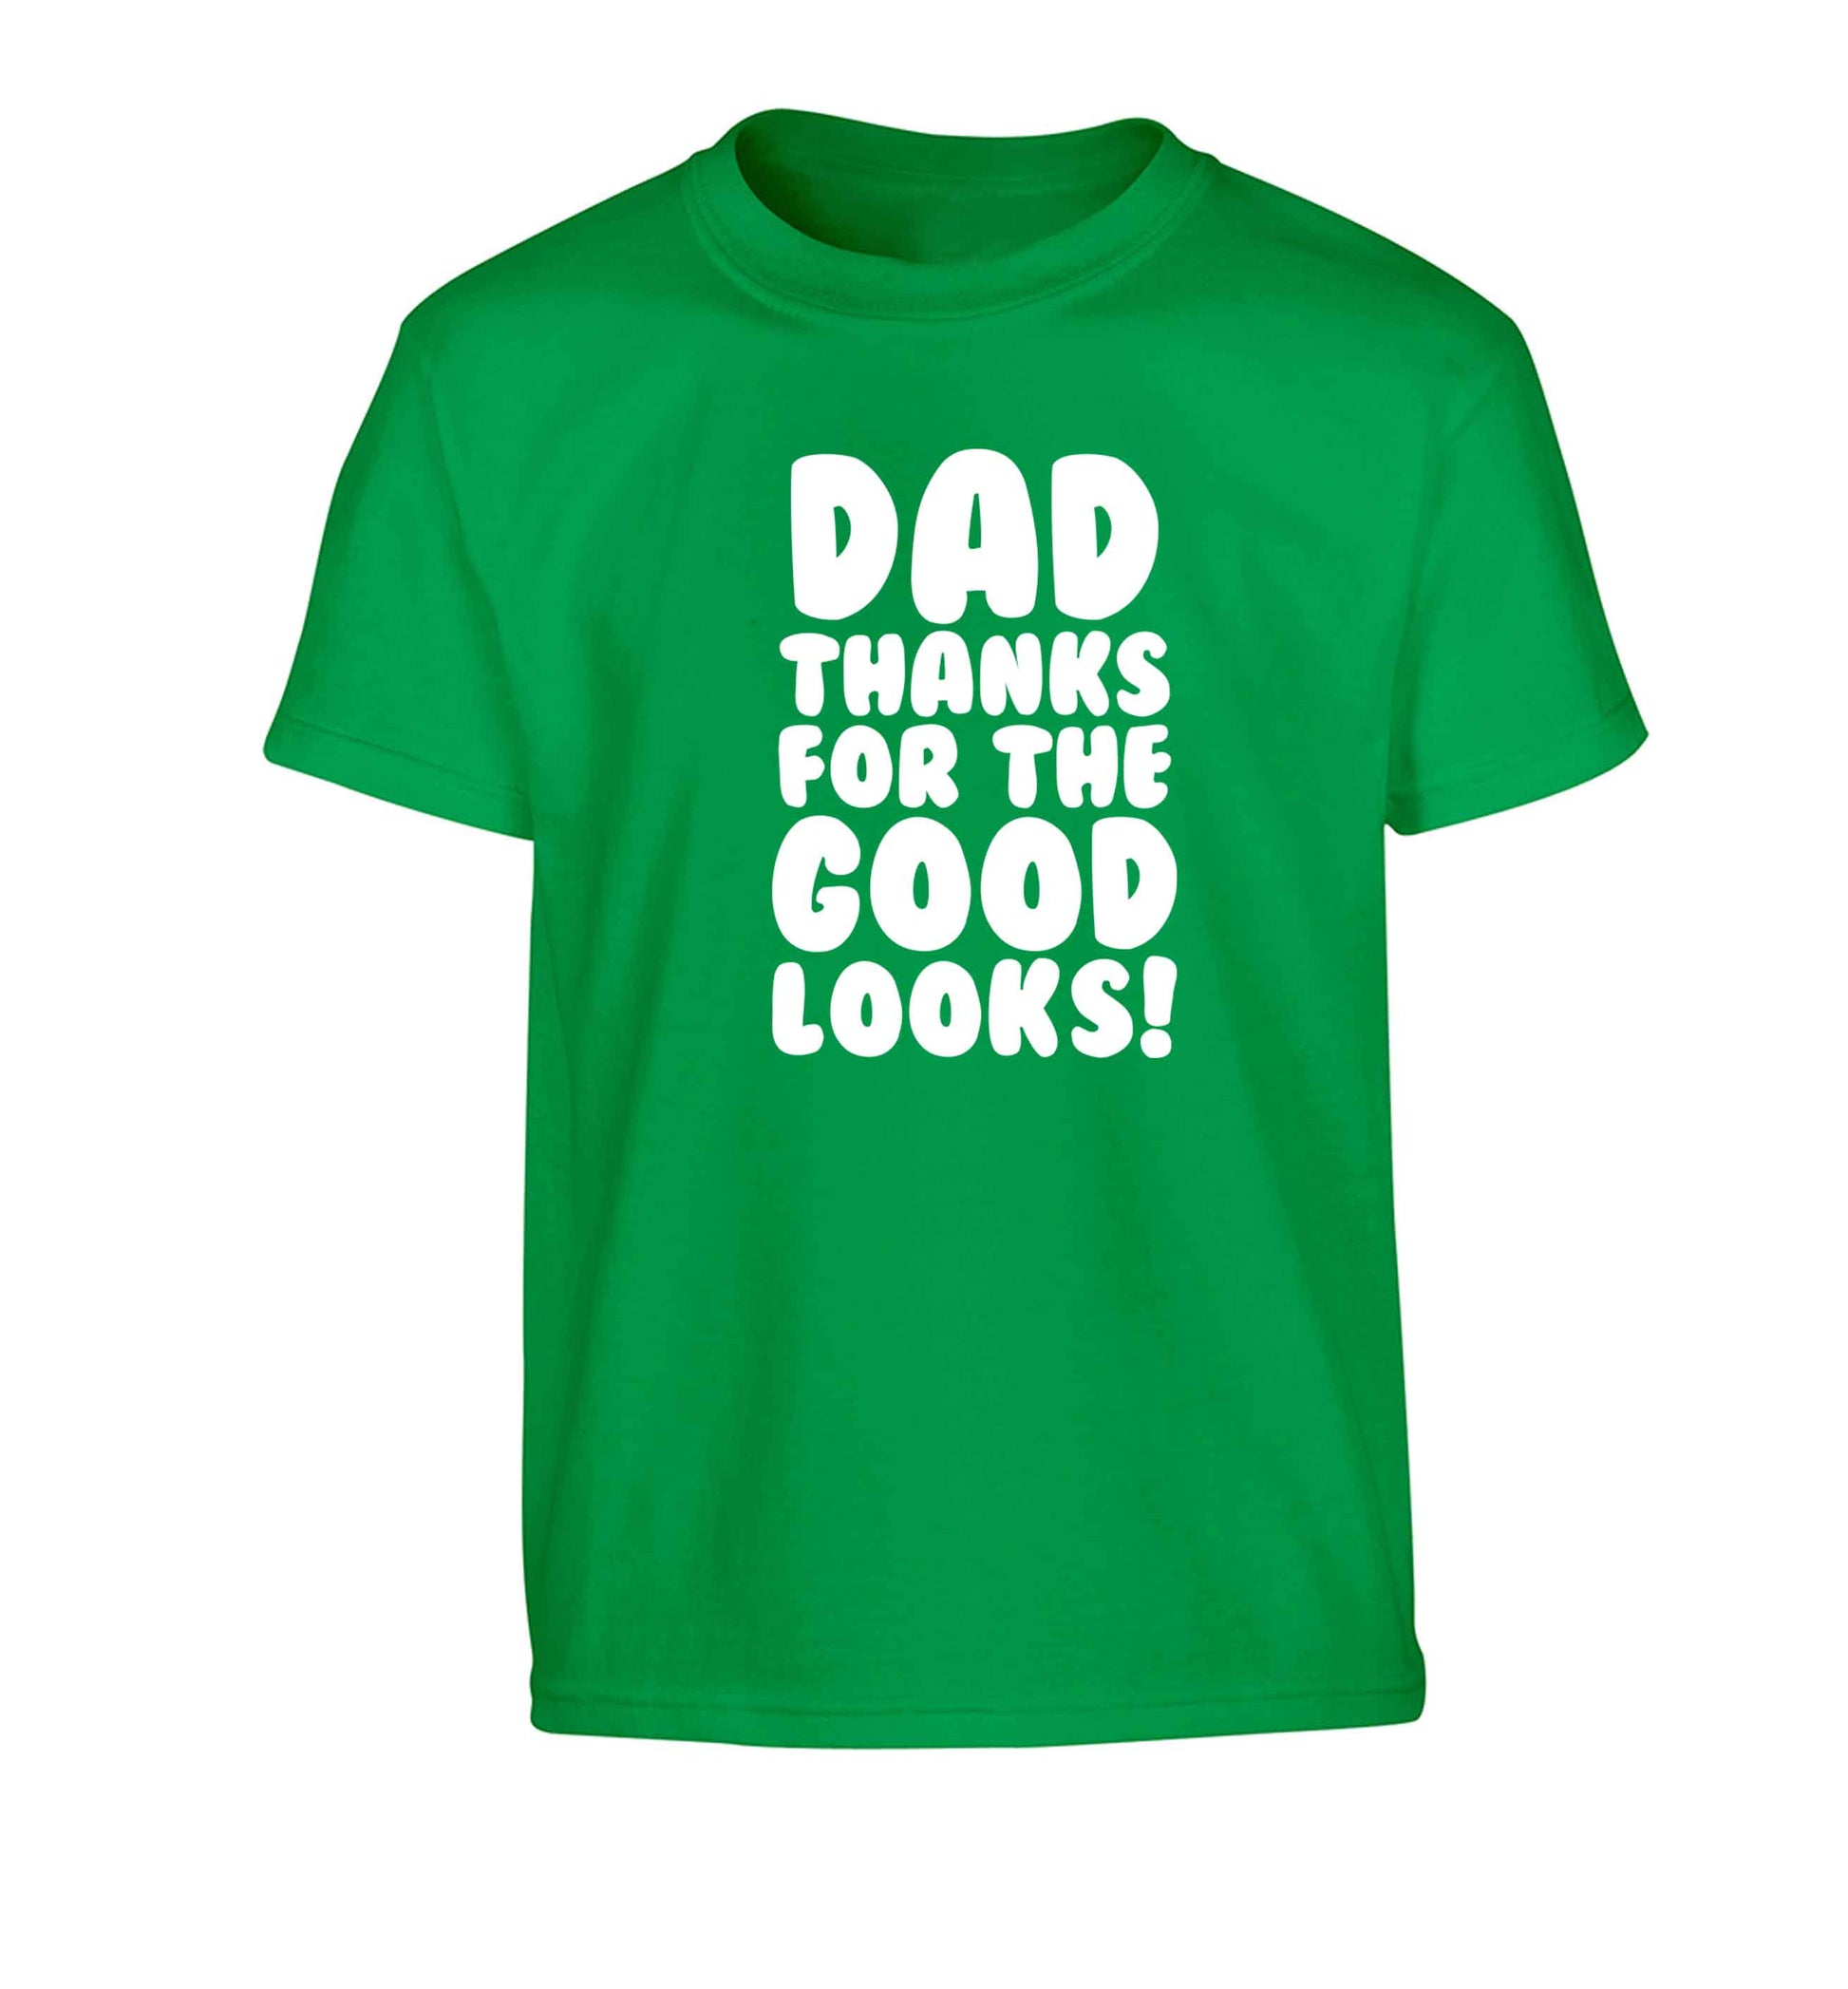 Dad thanks for the good looks Children's green Tshirt 12-13 Years